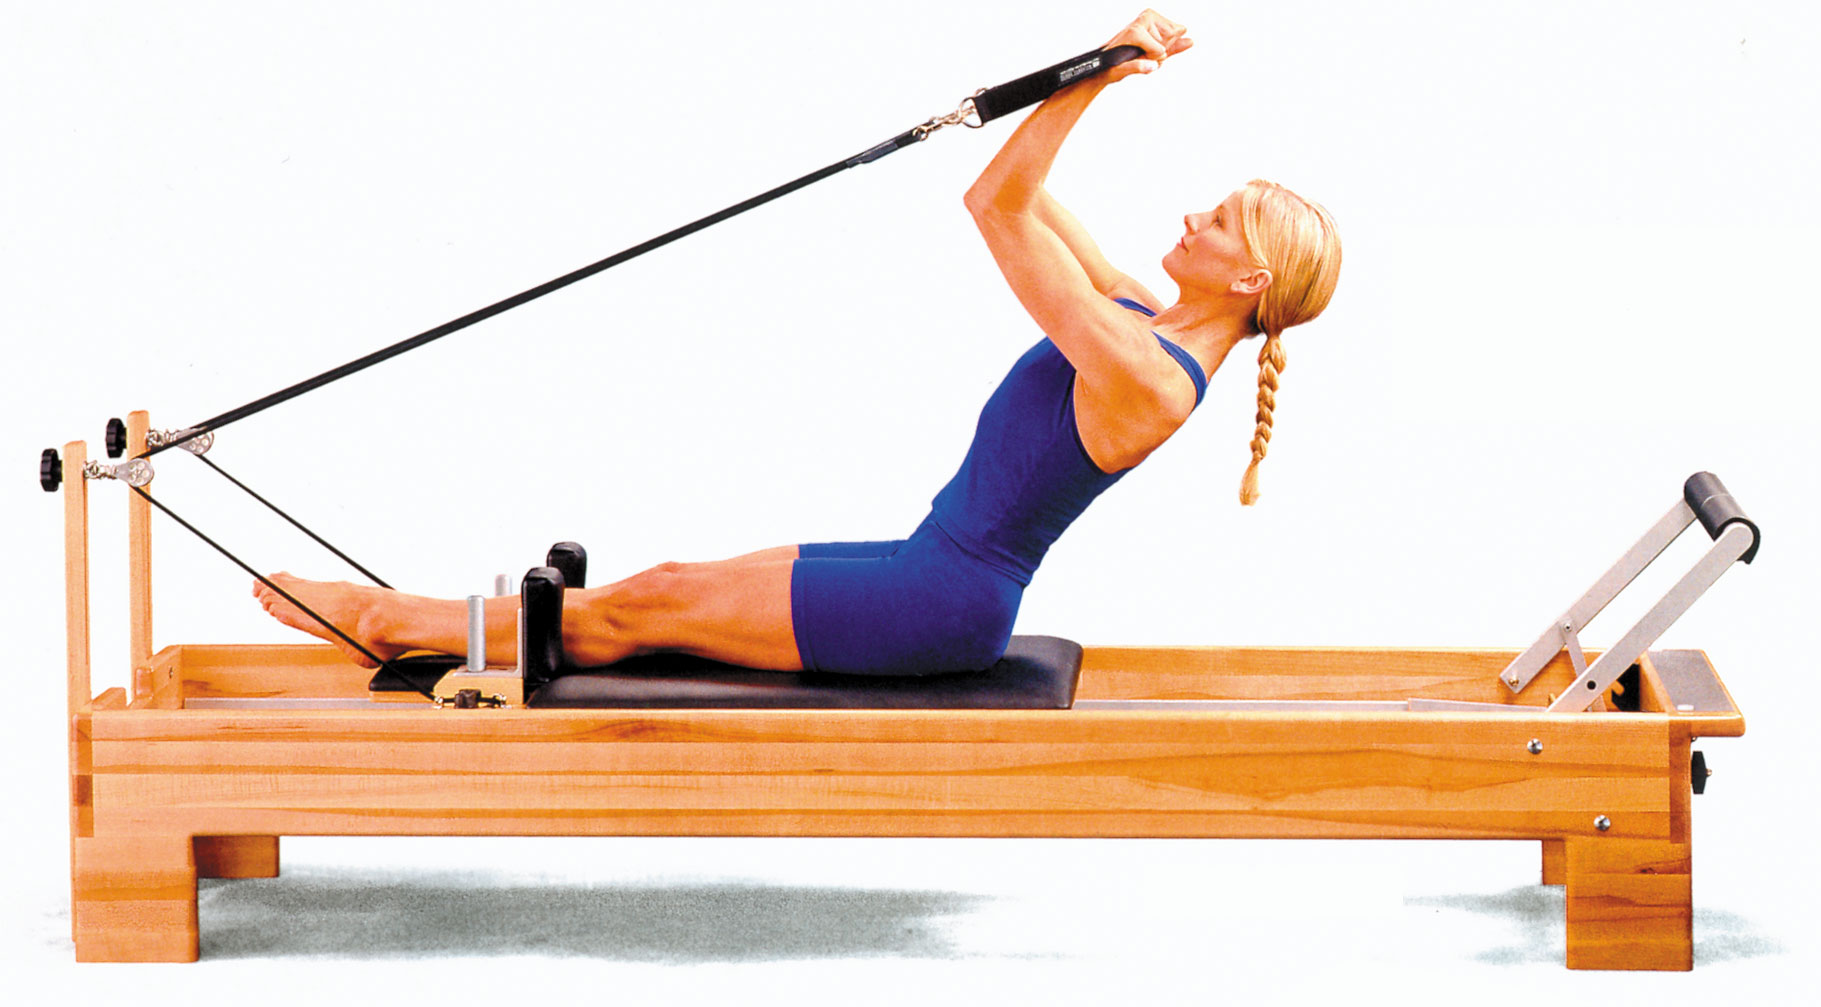 Great pilates exercises using a reformer apparatus.